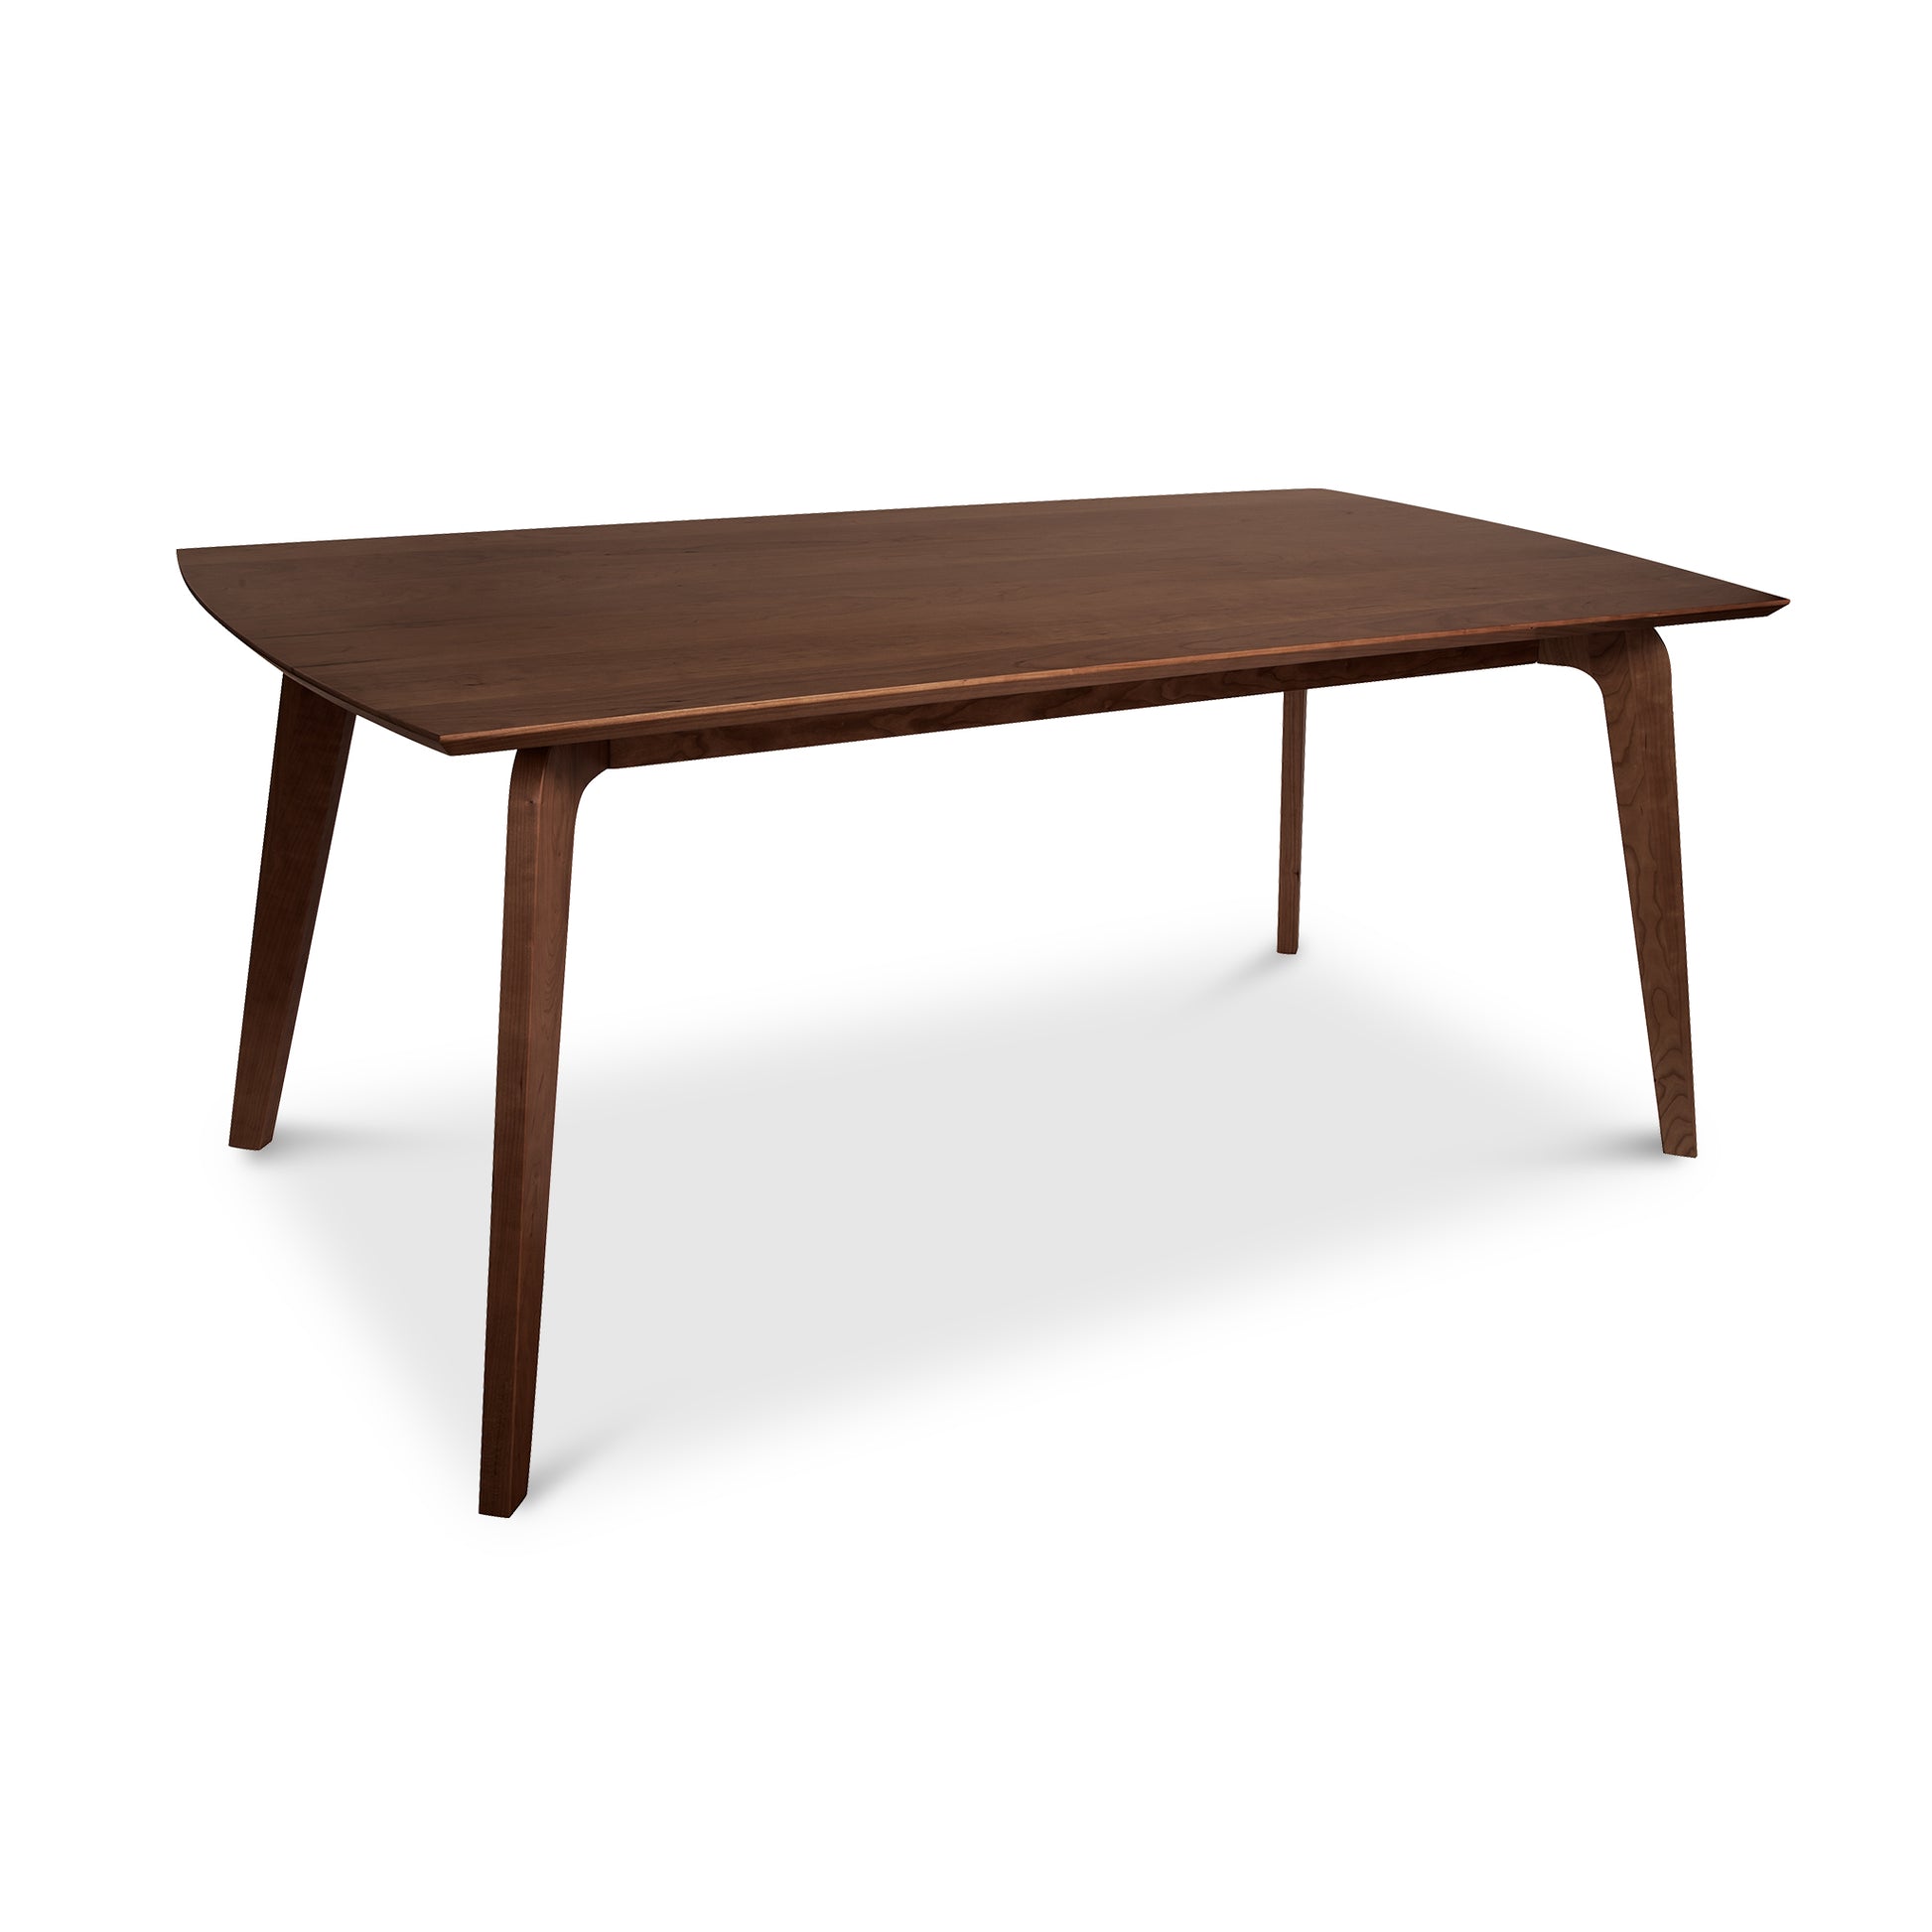 A mid-century modern dining table with a wooden base, the Brighton Solid-Top Table by Lyndon Furniture, perfect for any 20th century furniture design enthusiast.